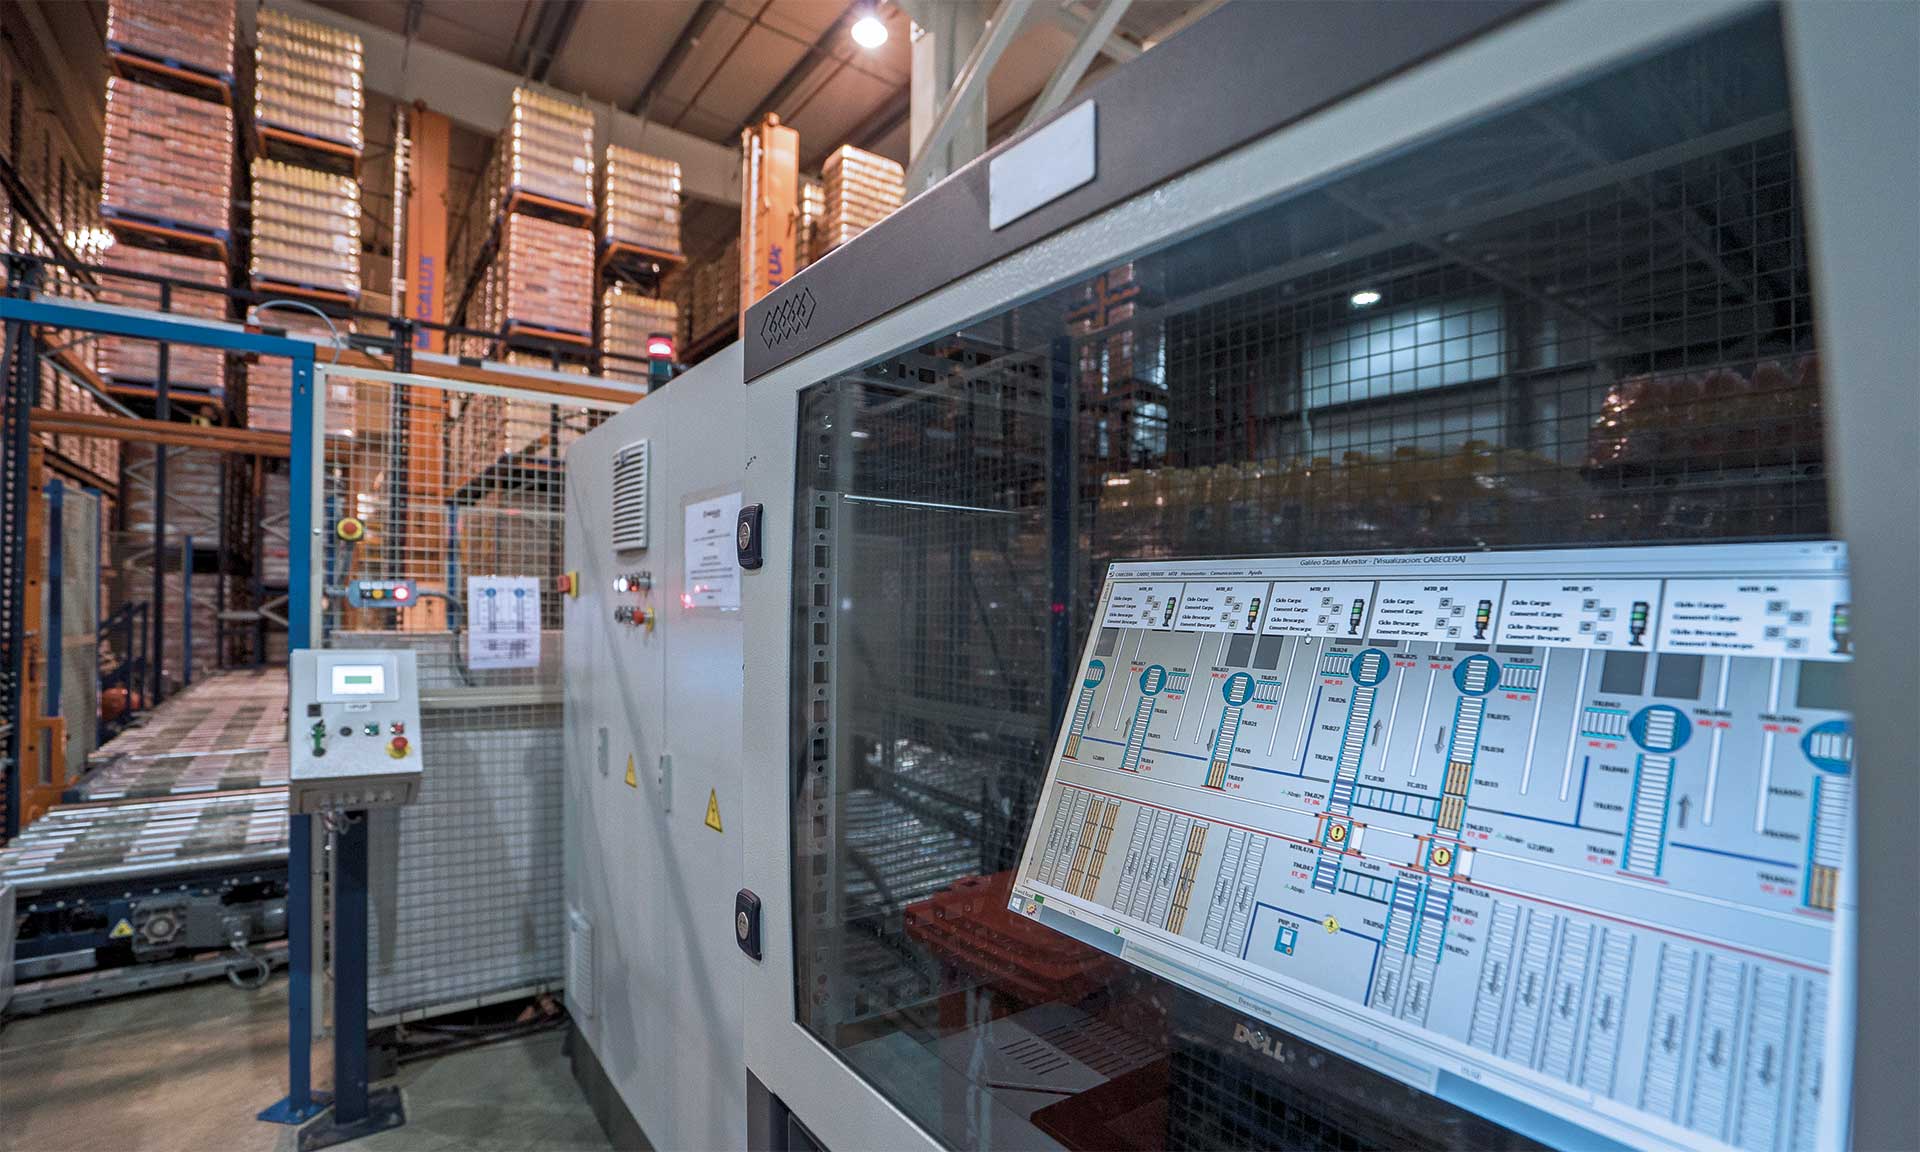 PLCs are industrial computers essential for the operation of automated warehouses